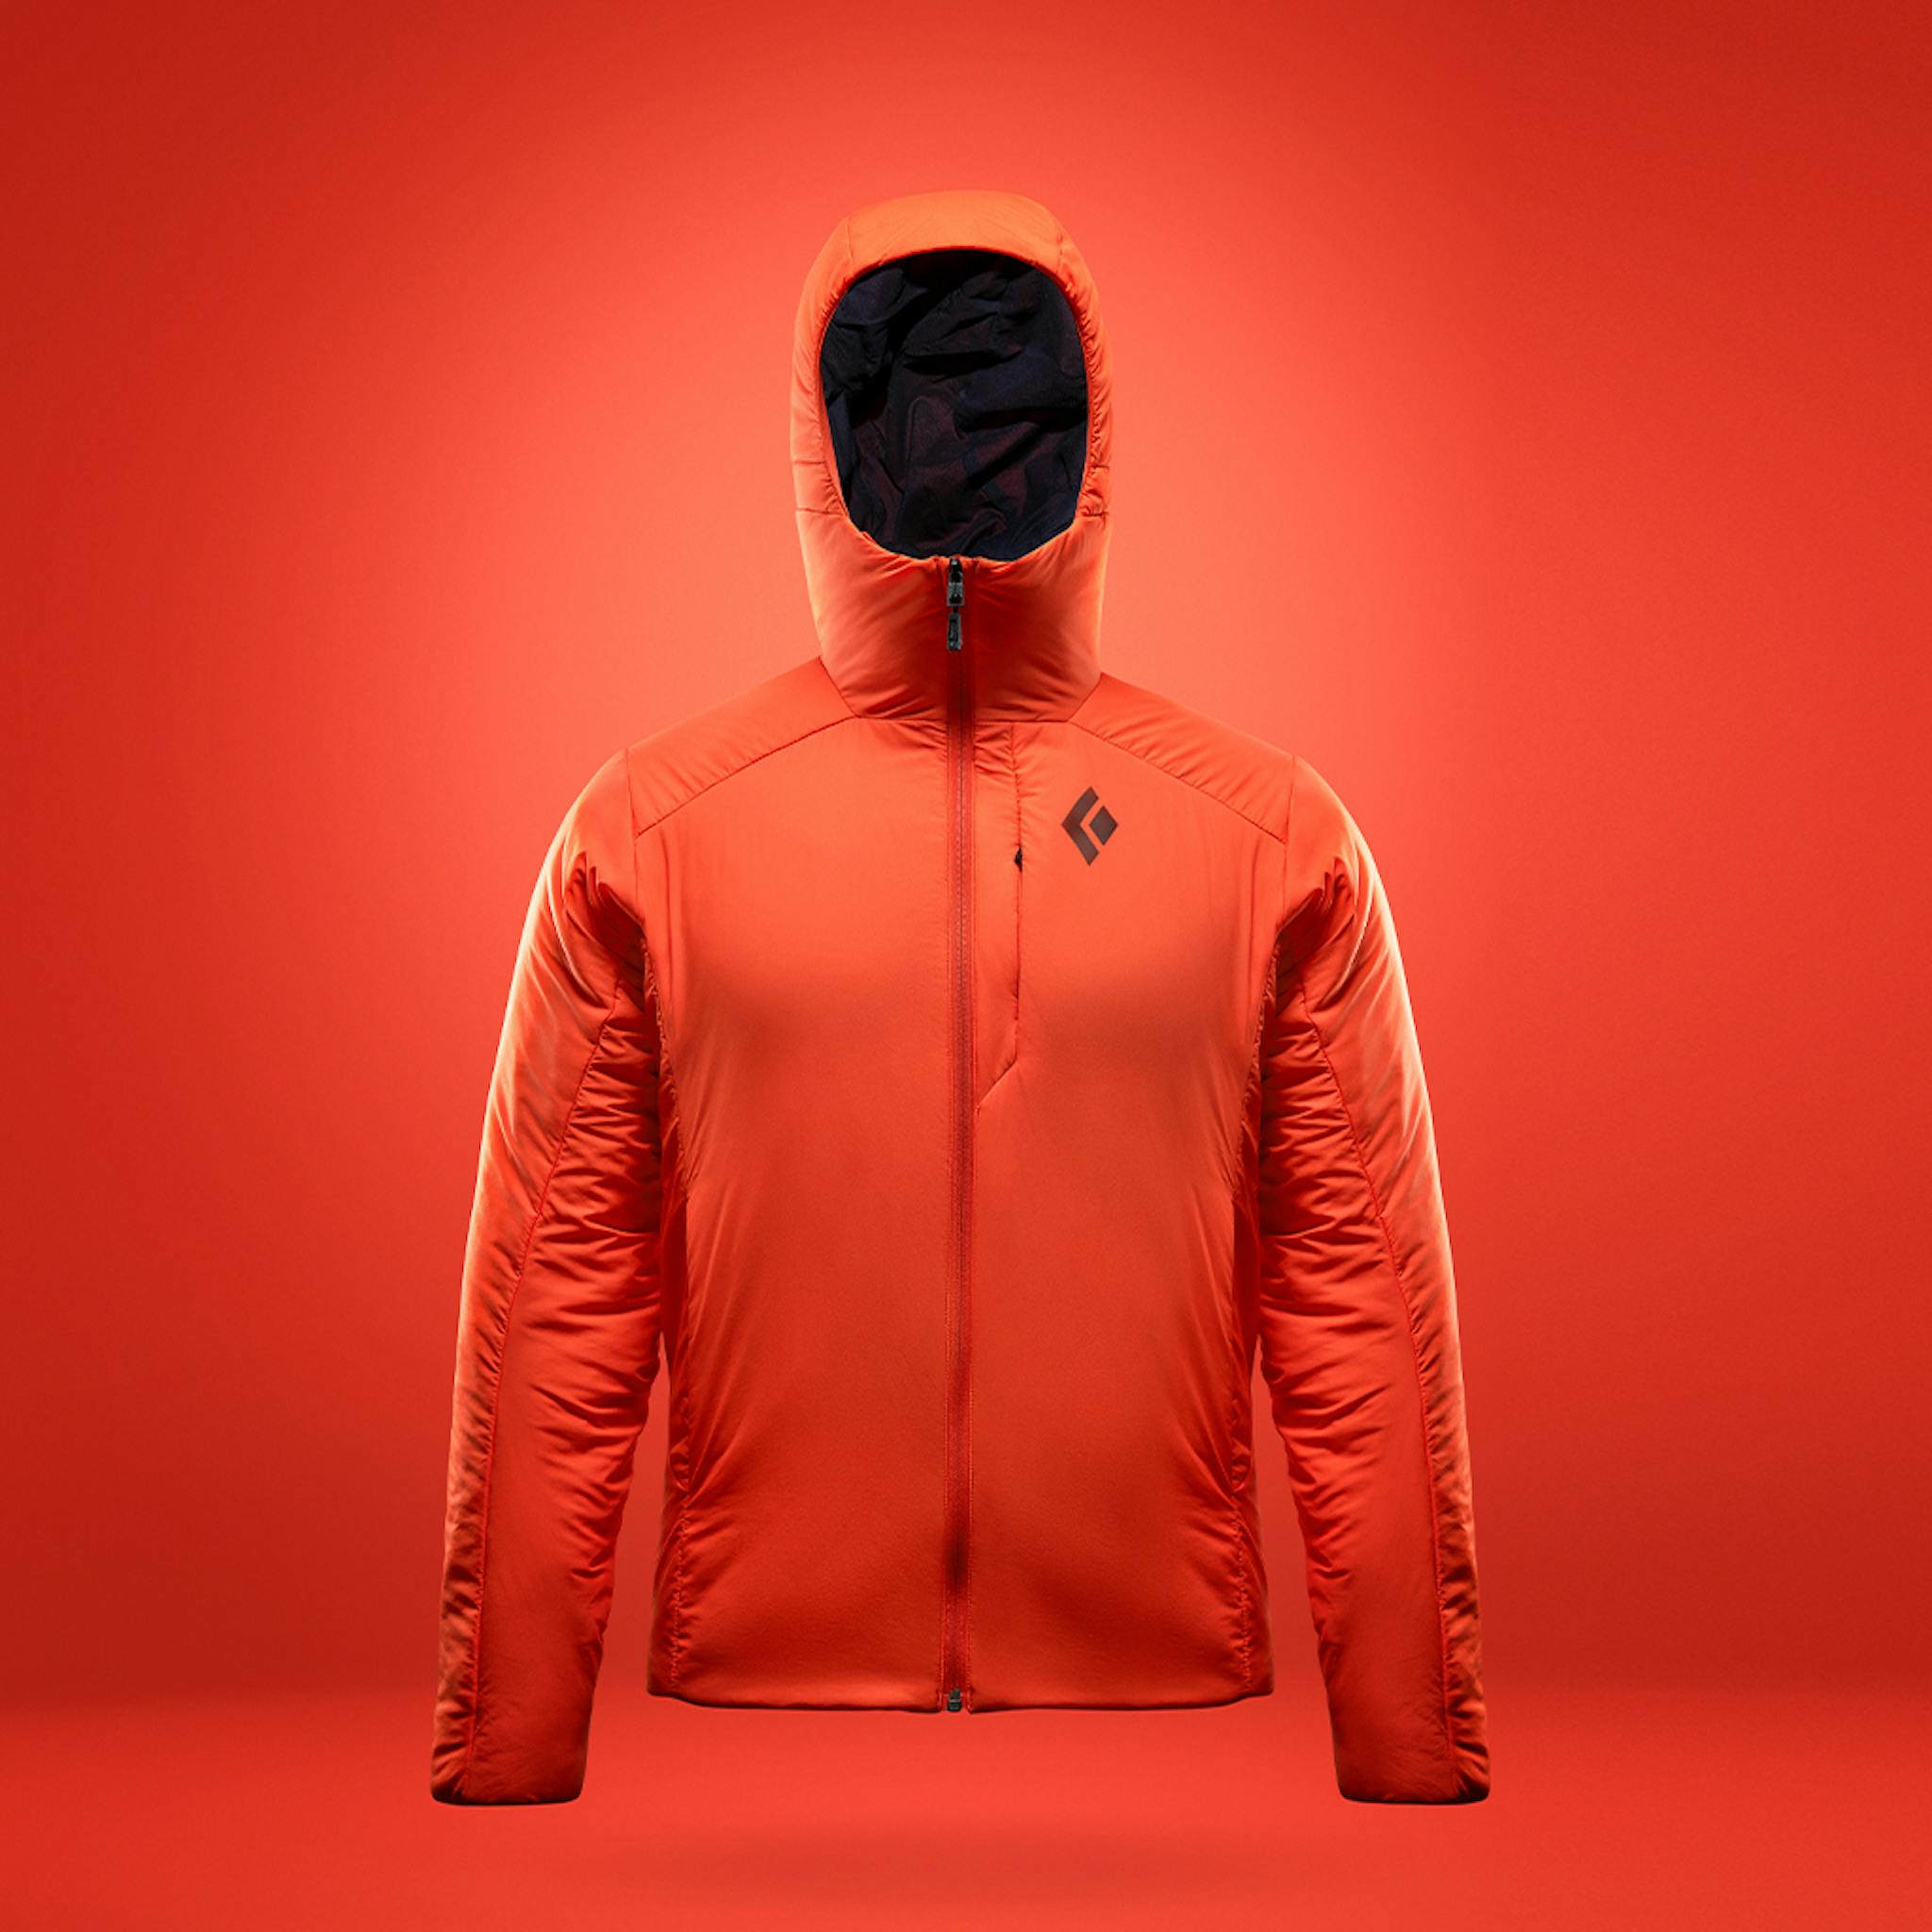 The Frist light Stretch Hoody in Octane.